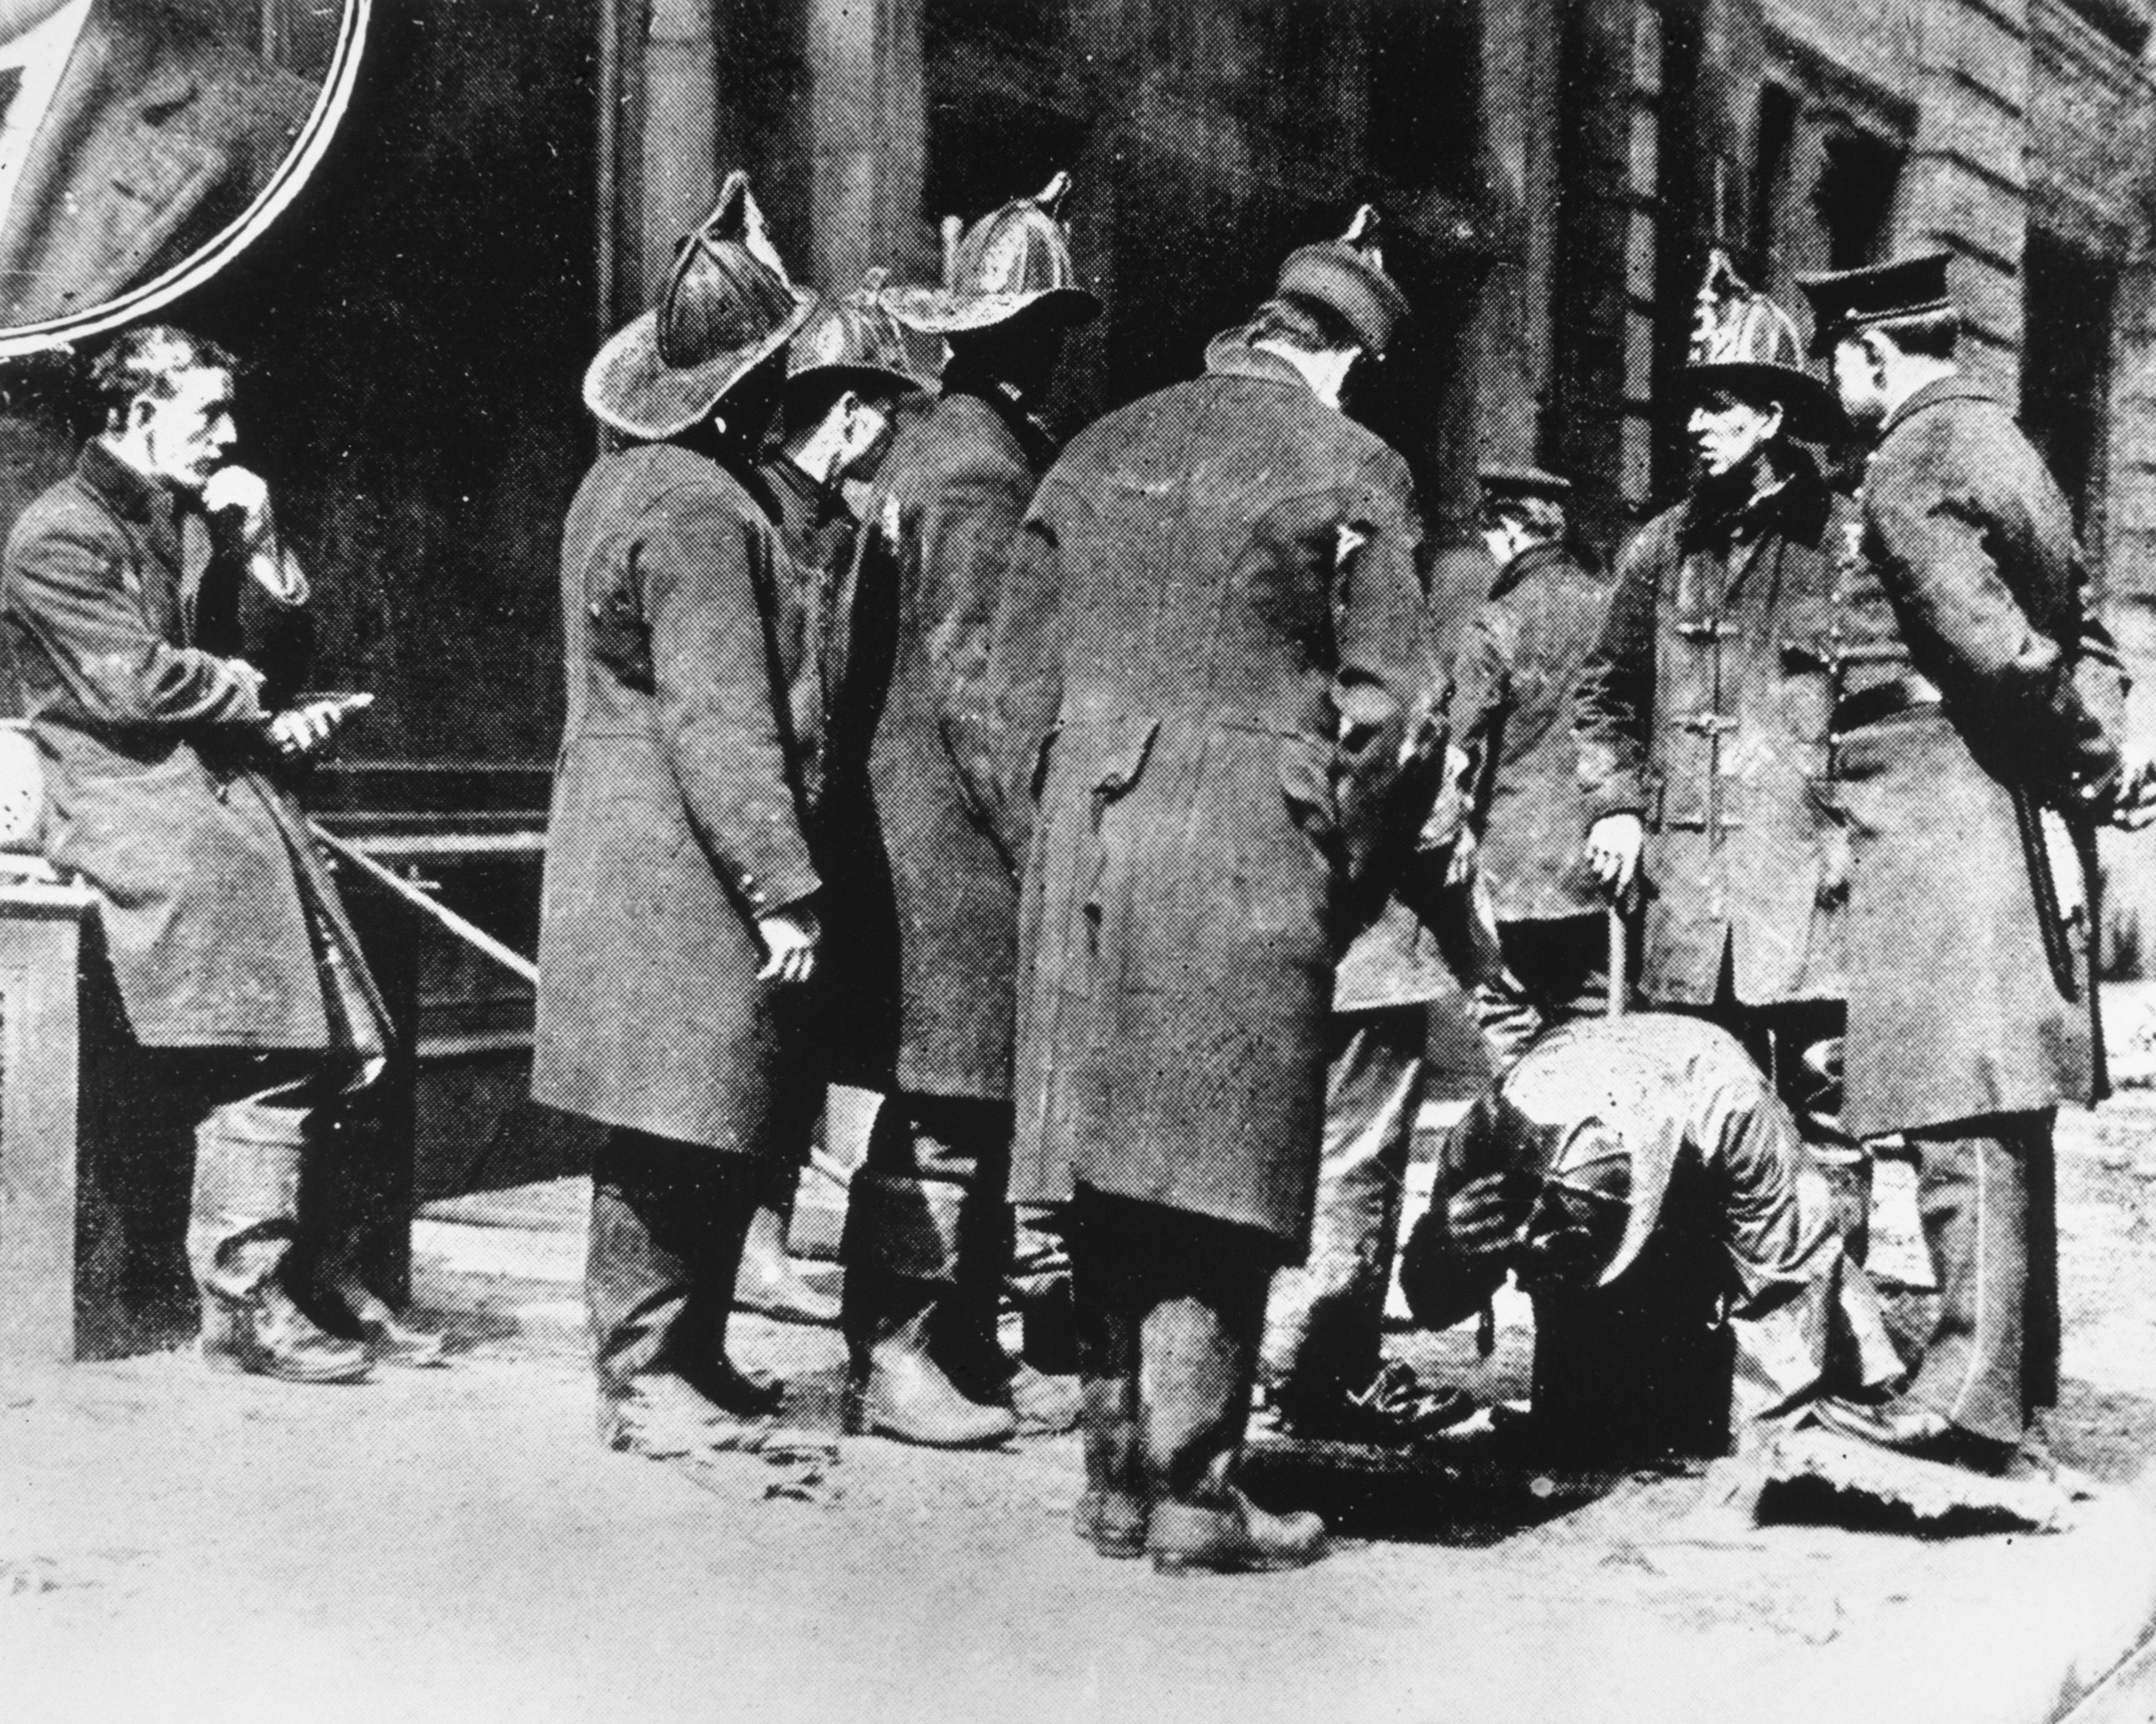 On March 25, 1911, 146 immigrant garment workers were killed after they were trapped on the upper floors of the Asch Building after the Triangle Shirtwaist Factory caught fire. The owners of the factory had chained shut the exit doors, and the workers, who were mostly young women, perished in the fire or died after jumping from the ten-story building. Firemen can be seen as they search for the bodies of those who crashed through the skylights and entrances of cellars in the sidewalk.